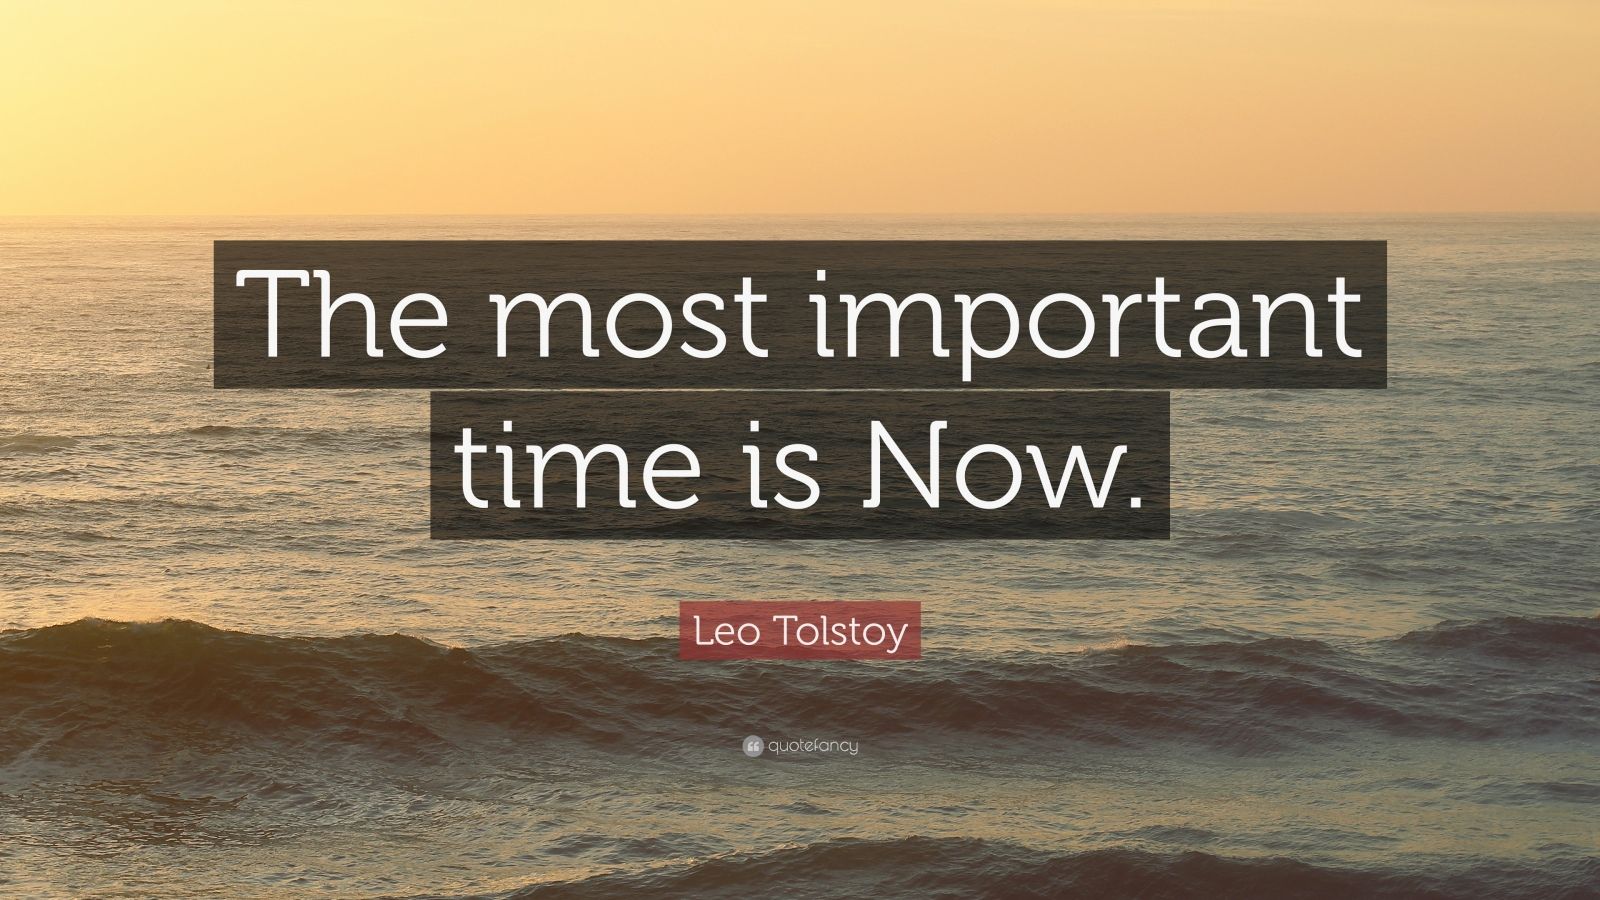 Leo Tolstoy Quote: "The most important time is Now." (12 ...